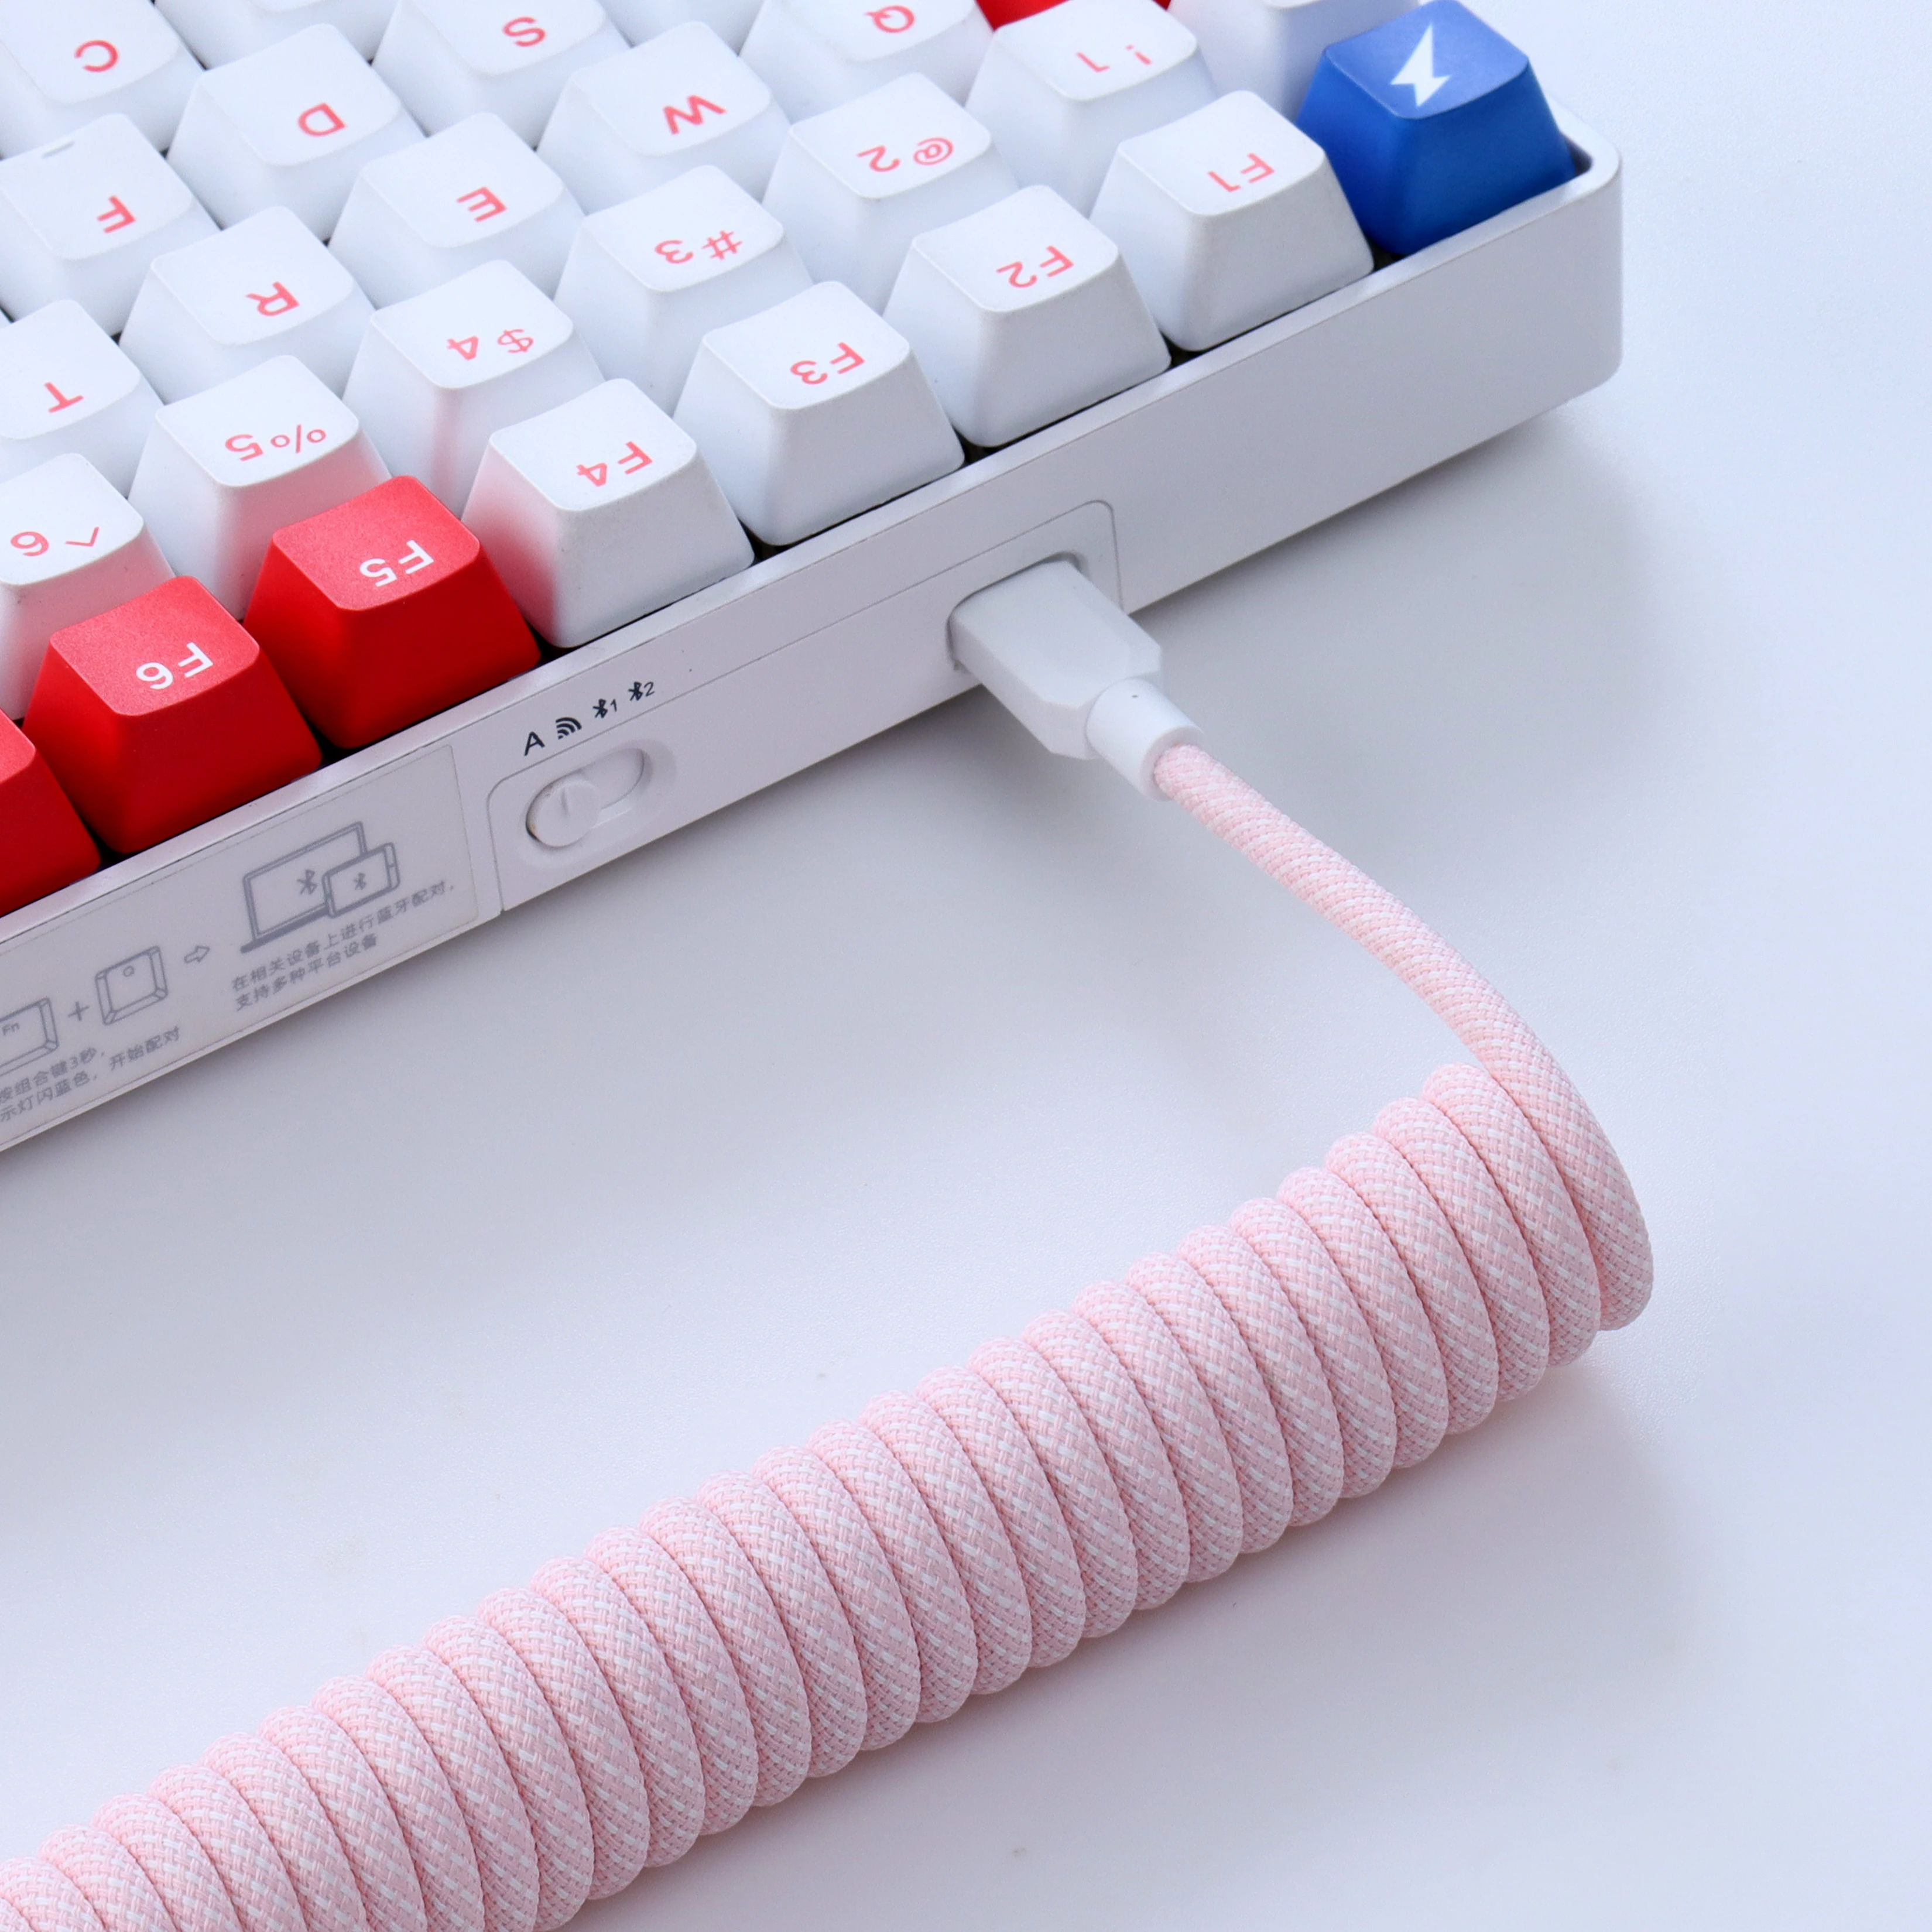 falme vokse op krans Coiled Cable Mechanical Keyboard Type C | Coiled Usb C Cable Keyboard - New  - Aliexpress